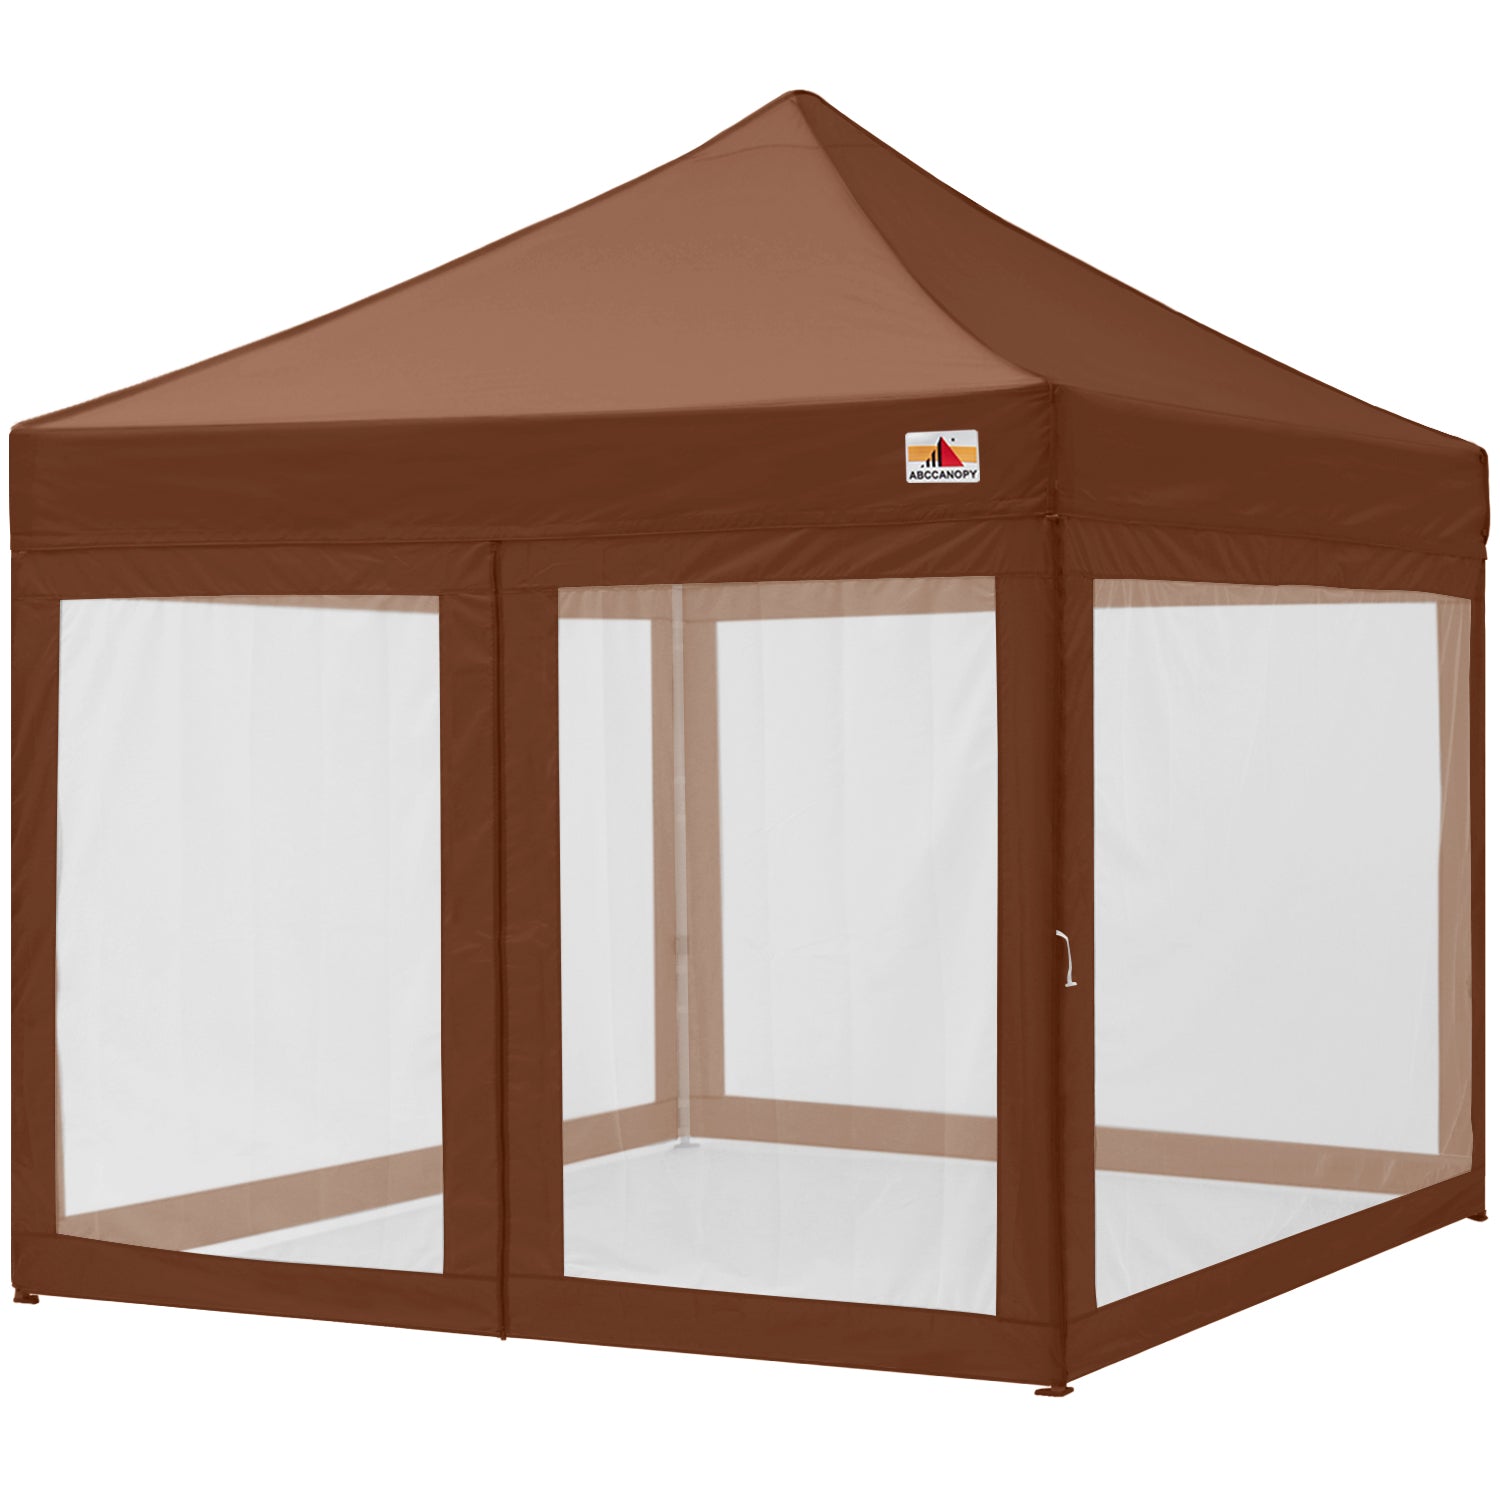 S1 Commercial Easy Set-up Portable 10x10 Canopy with Mesh Walls